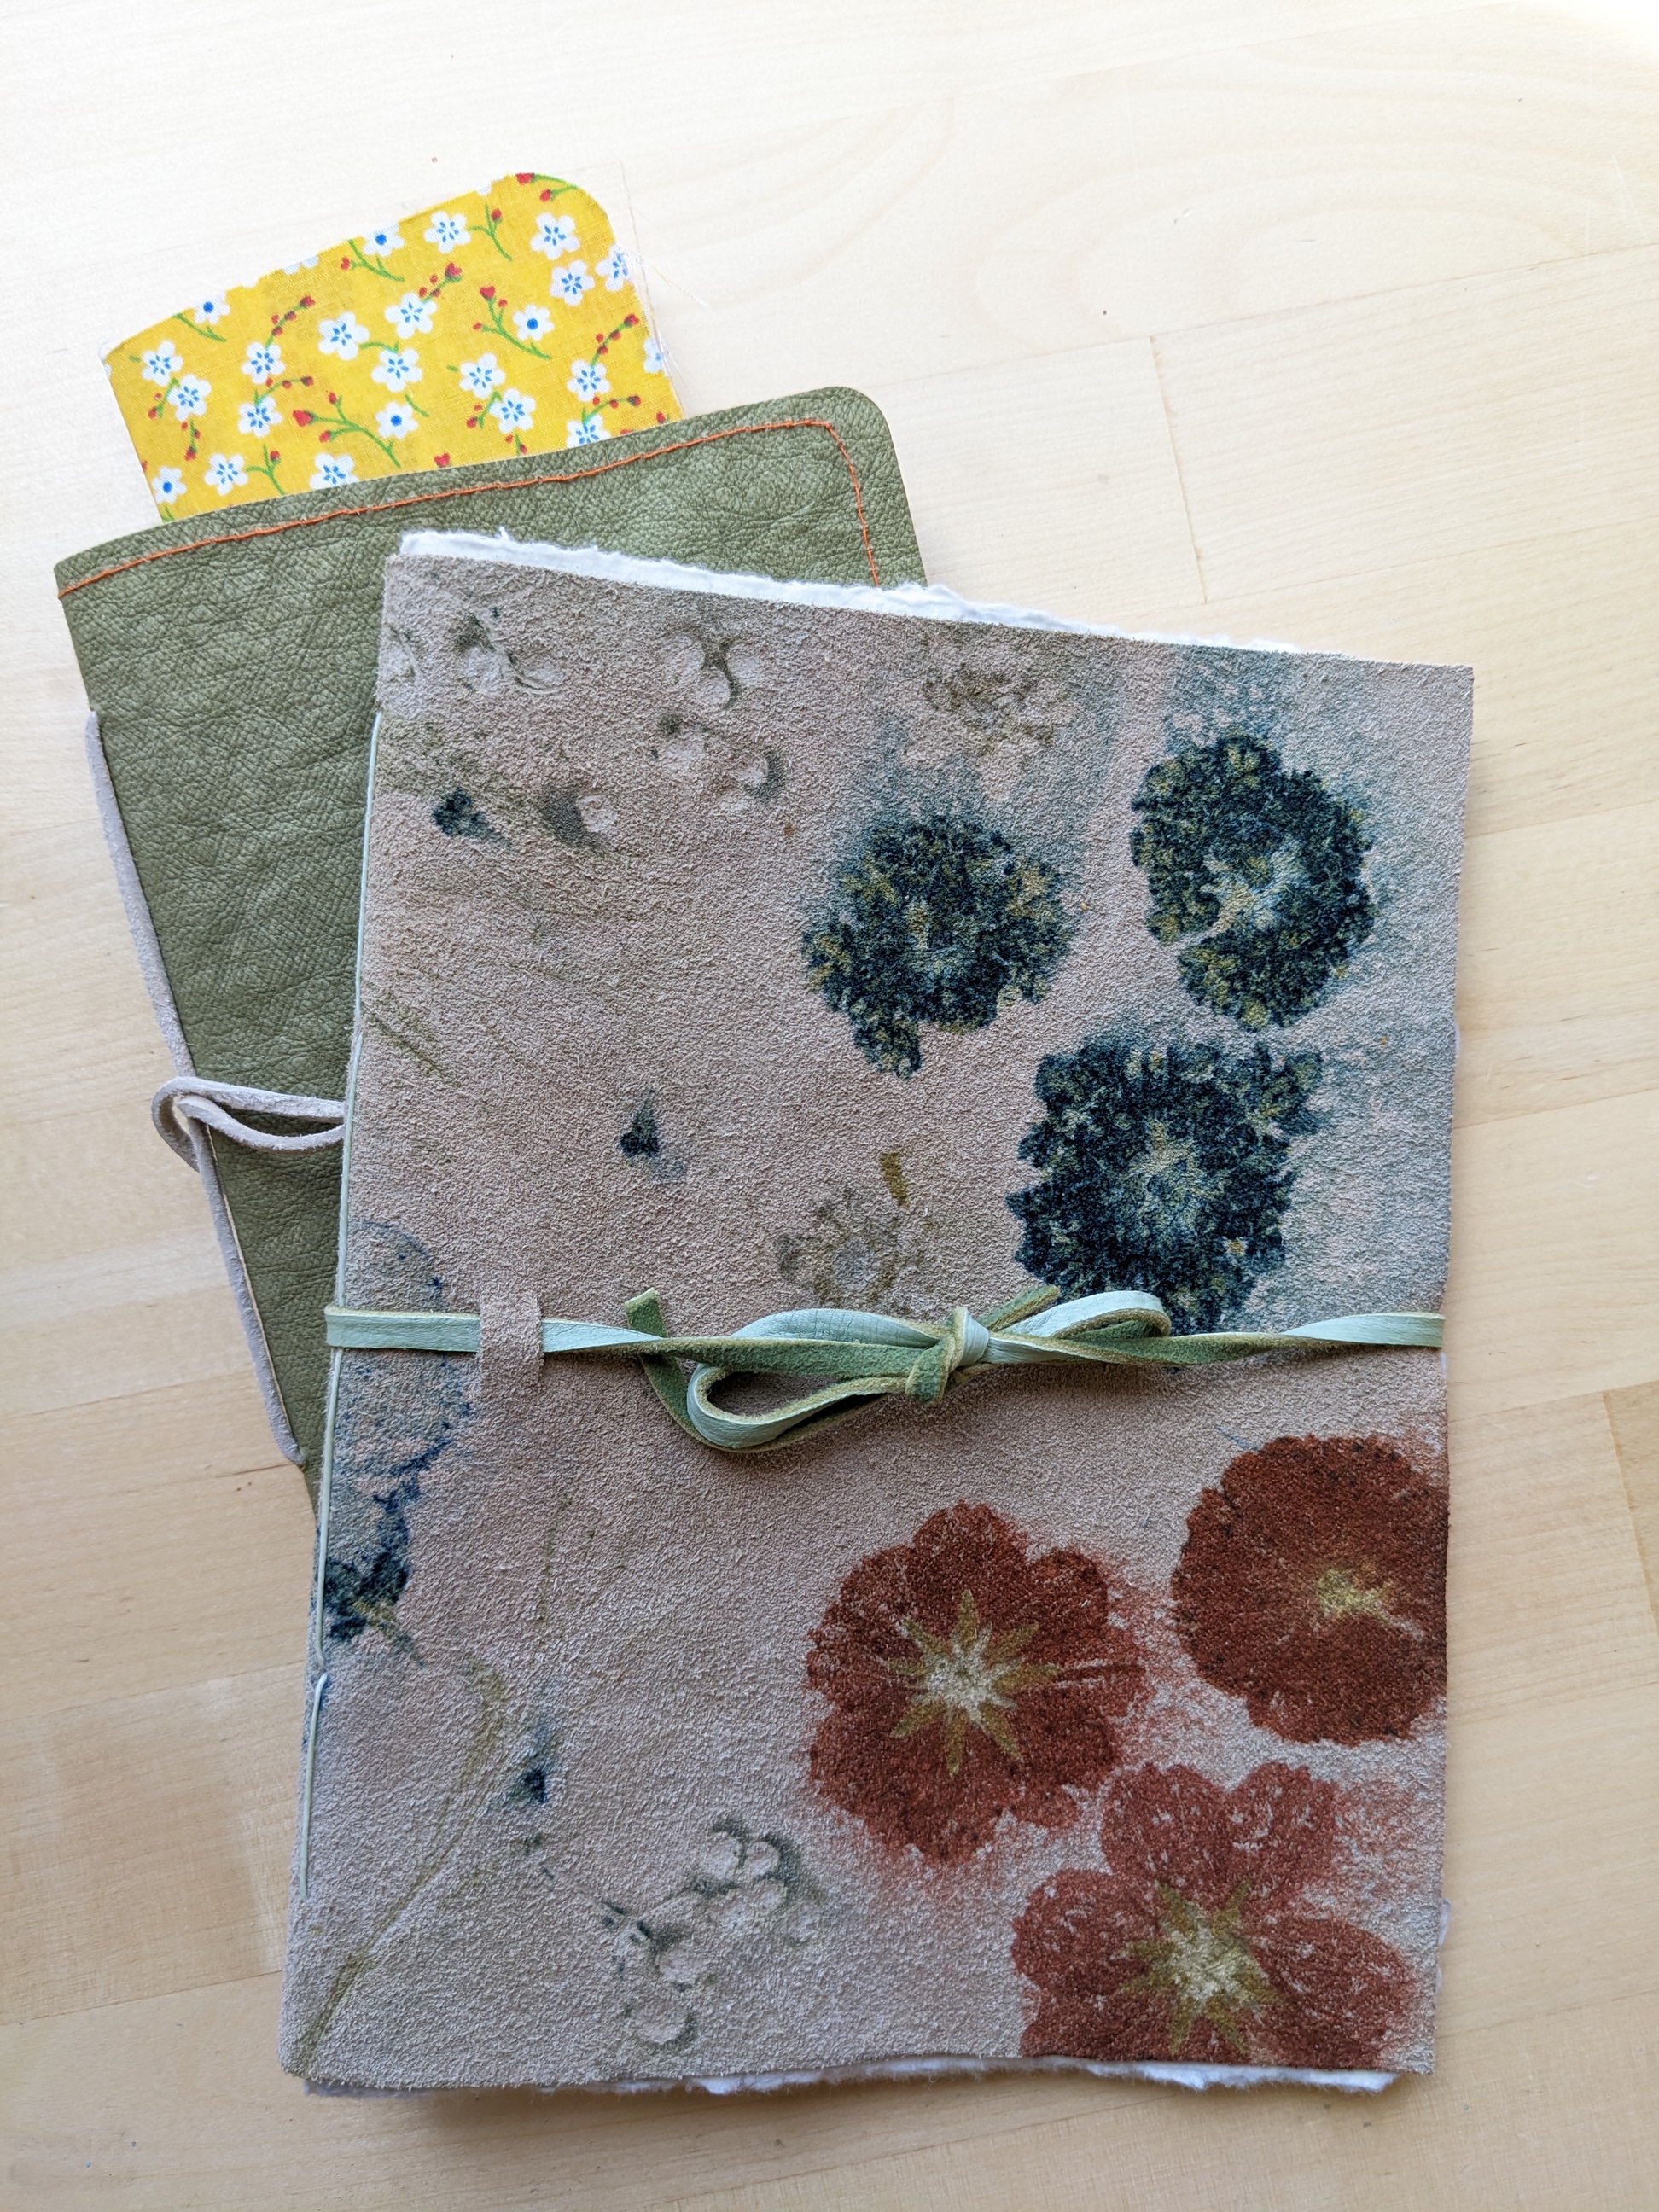 Three different journals with the same pamphlet stitch binding. Top journal is flower pounded leather.